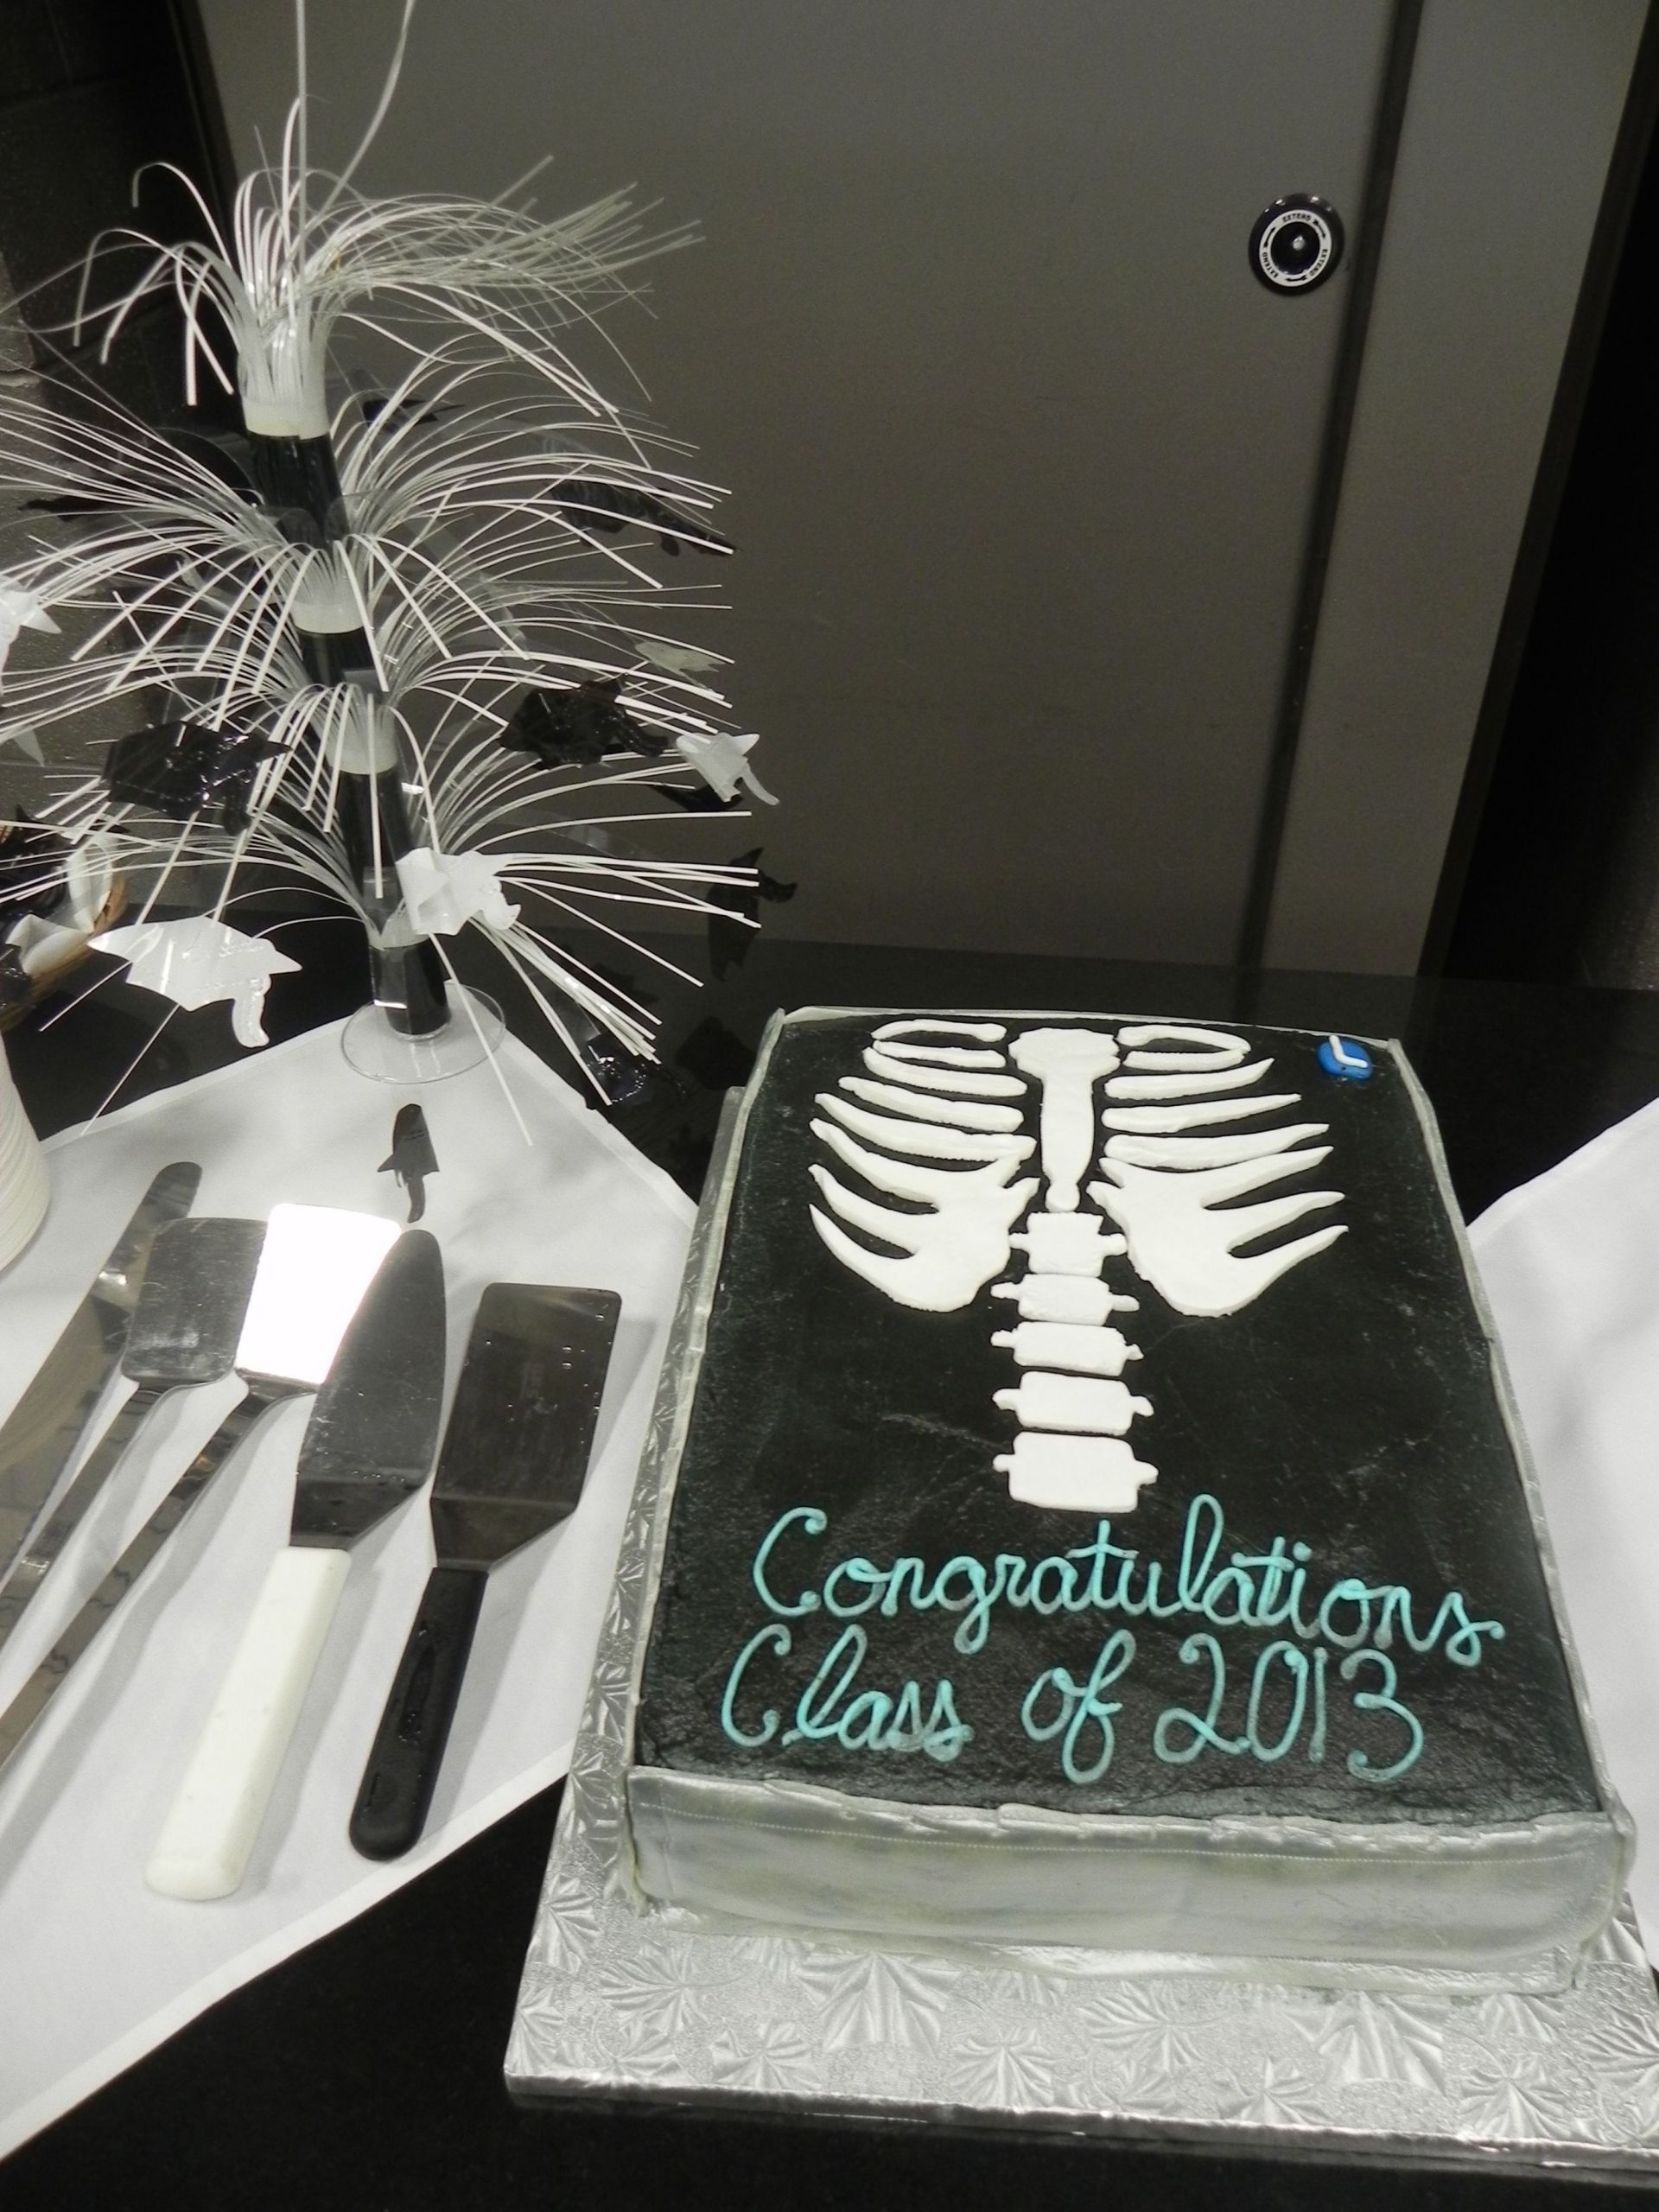 Radiology Graduation Party Ideas
 Pin on Radiography